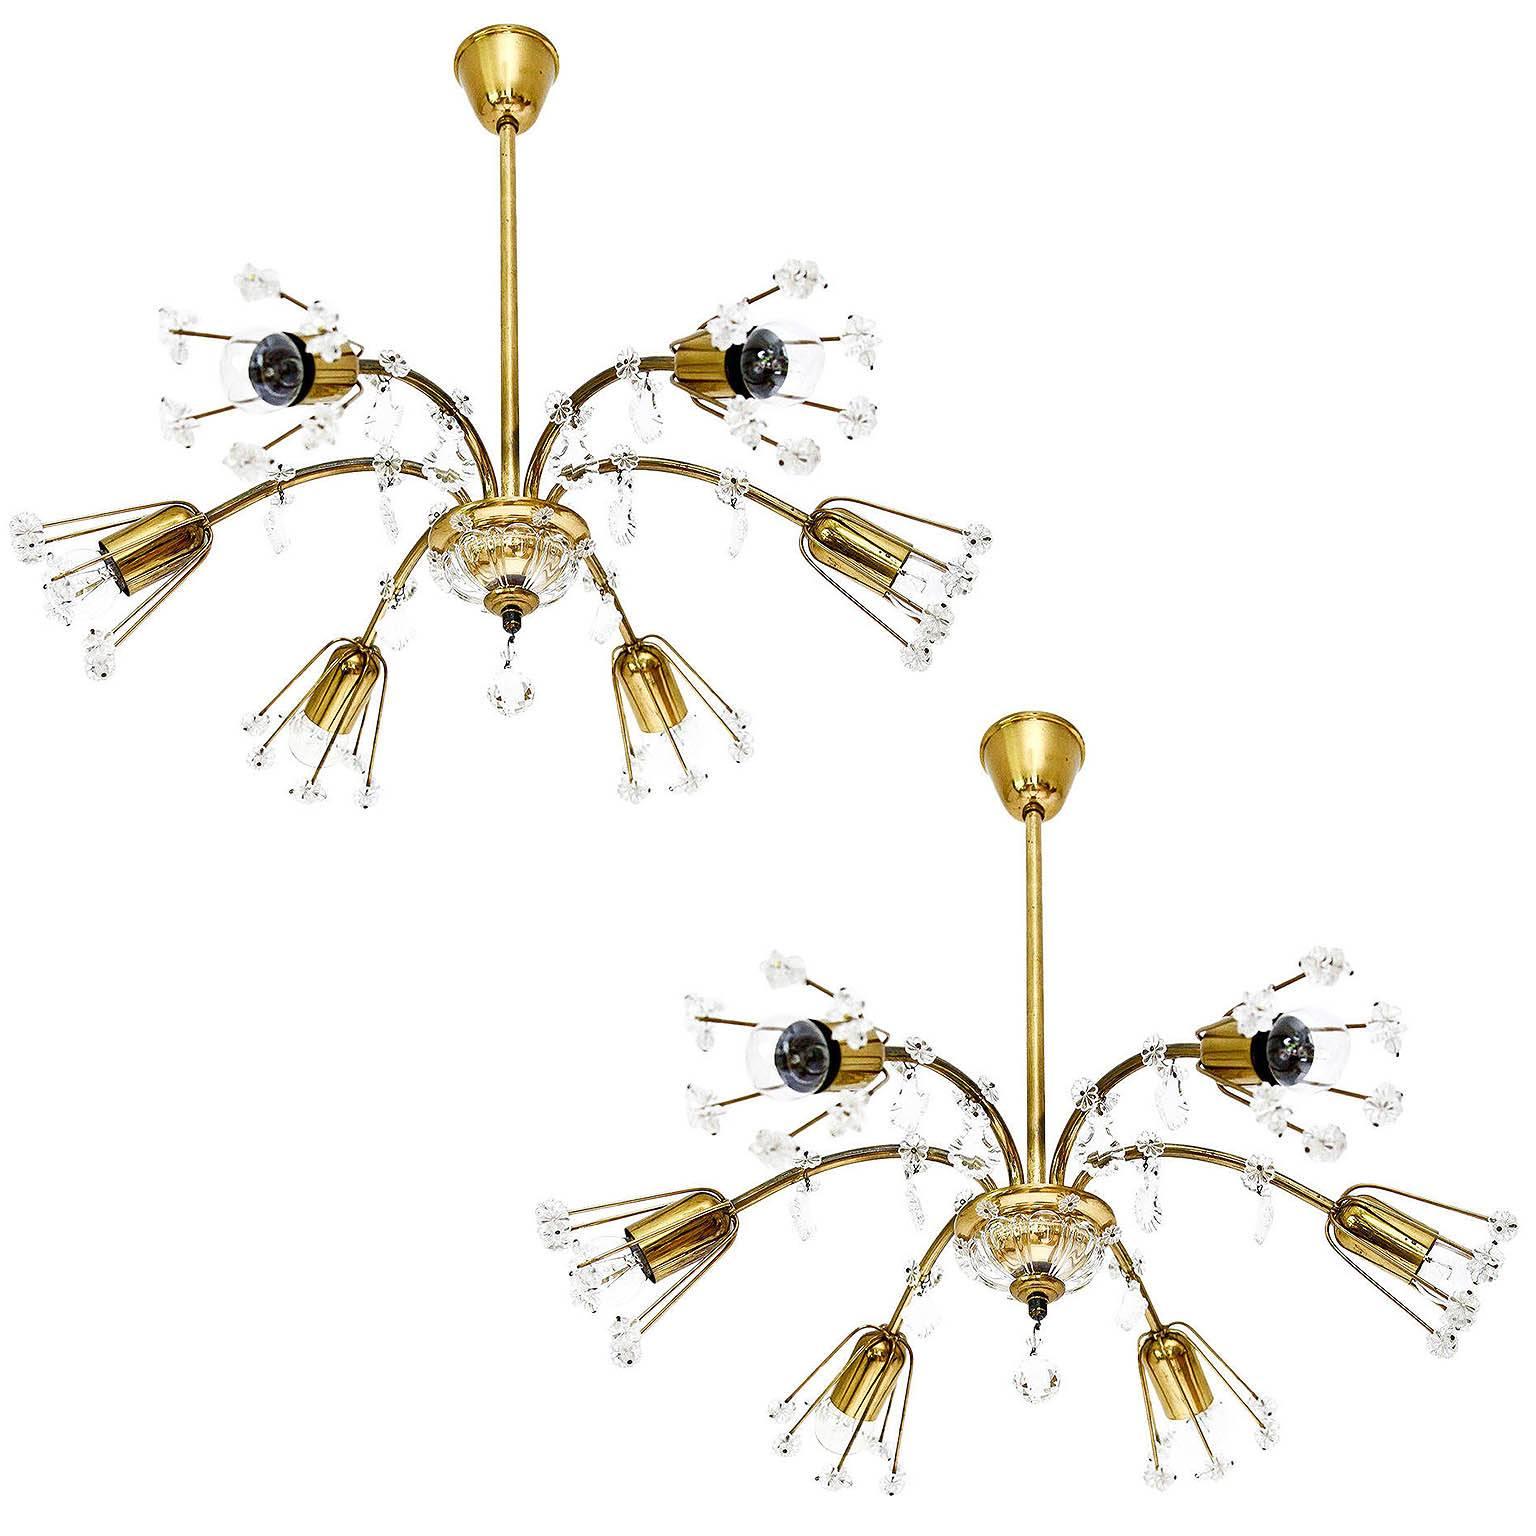 Pair of Emil Stejnar Chandeliers or Flush Mount Lights, Patinated Brass, 1950s